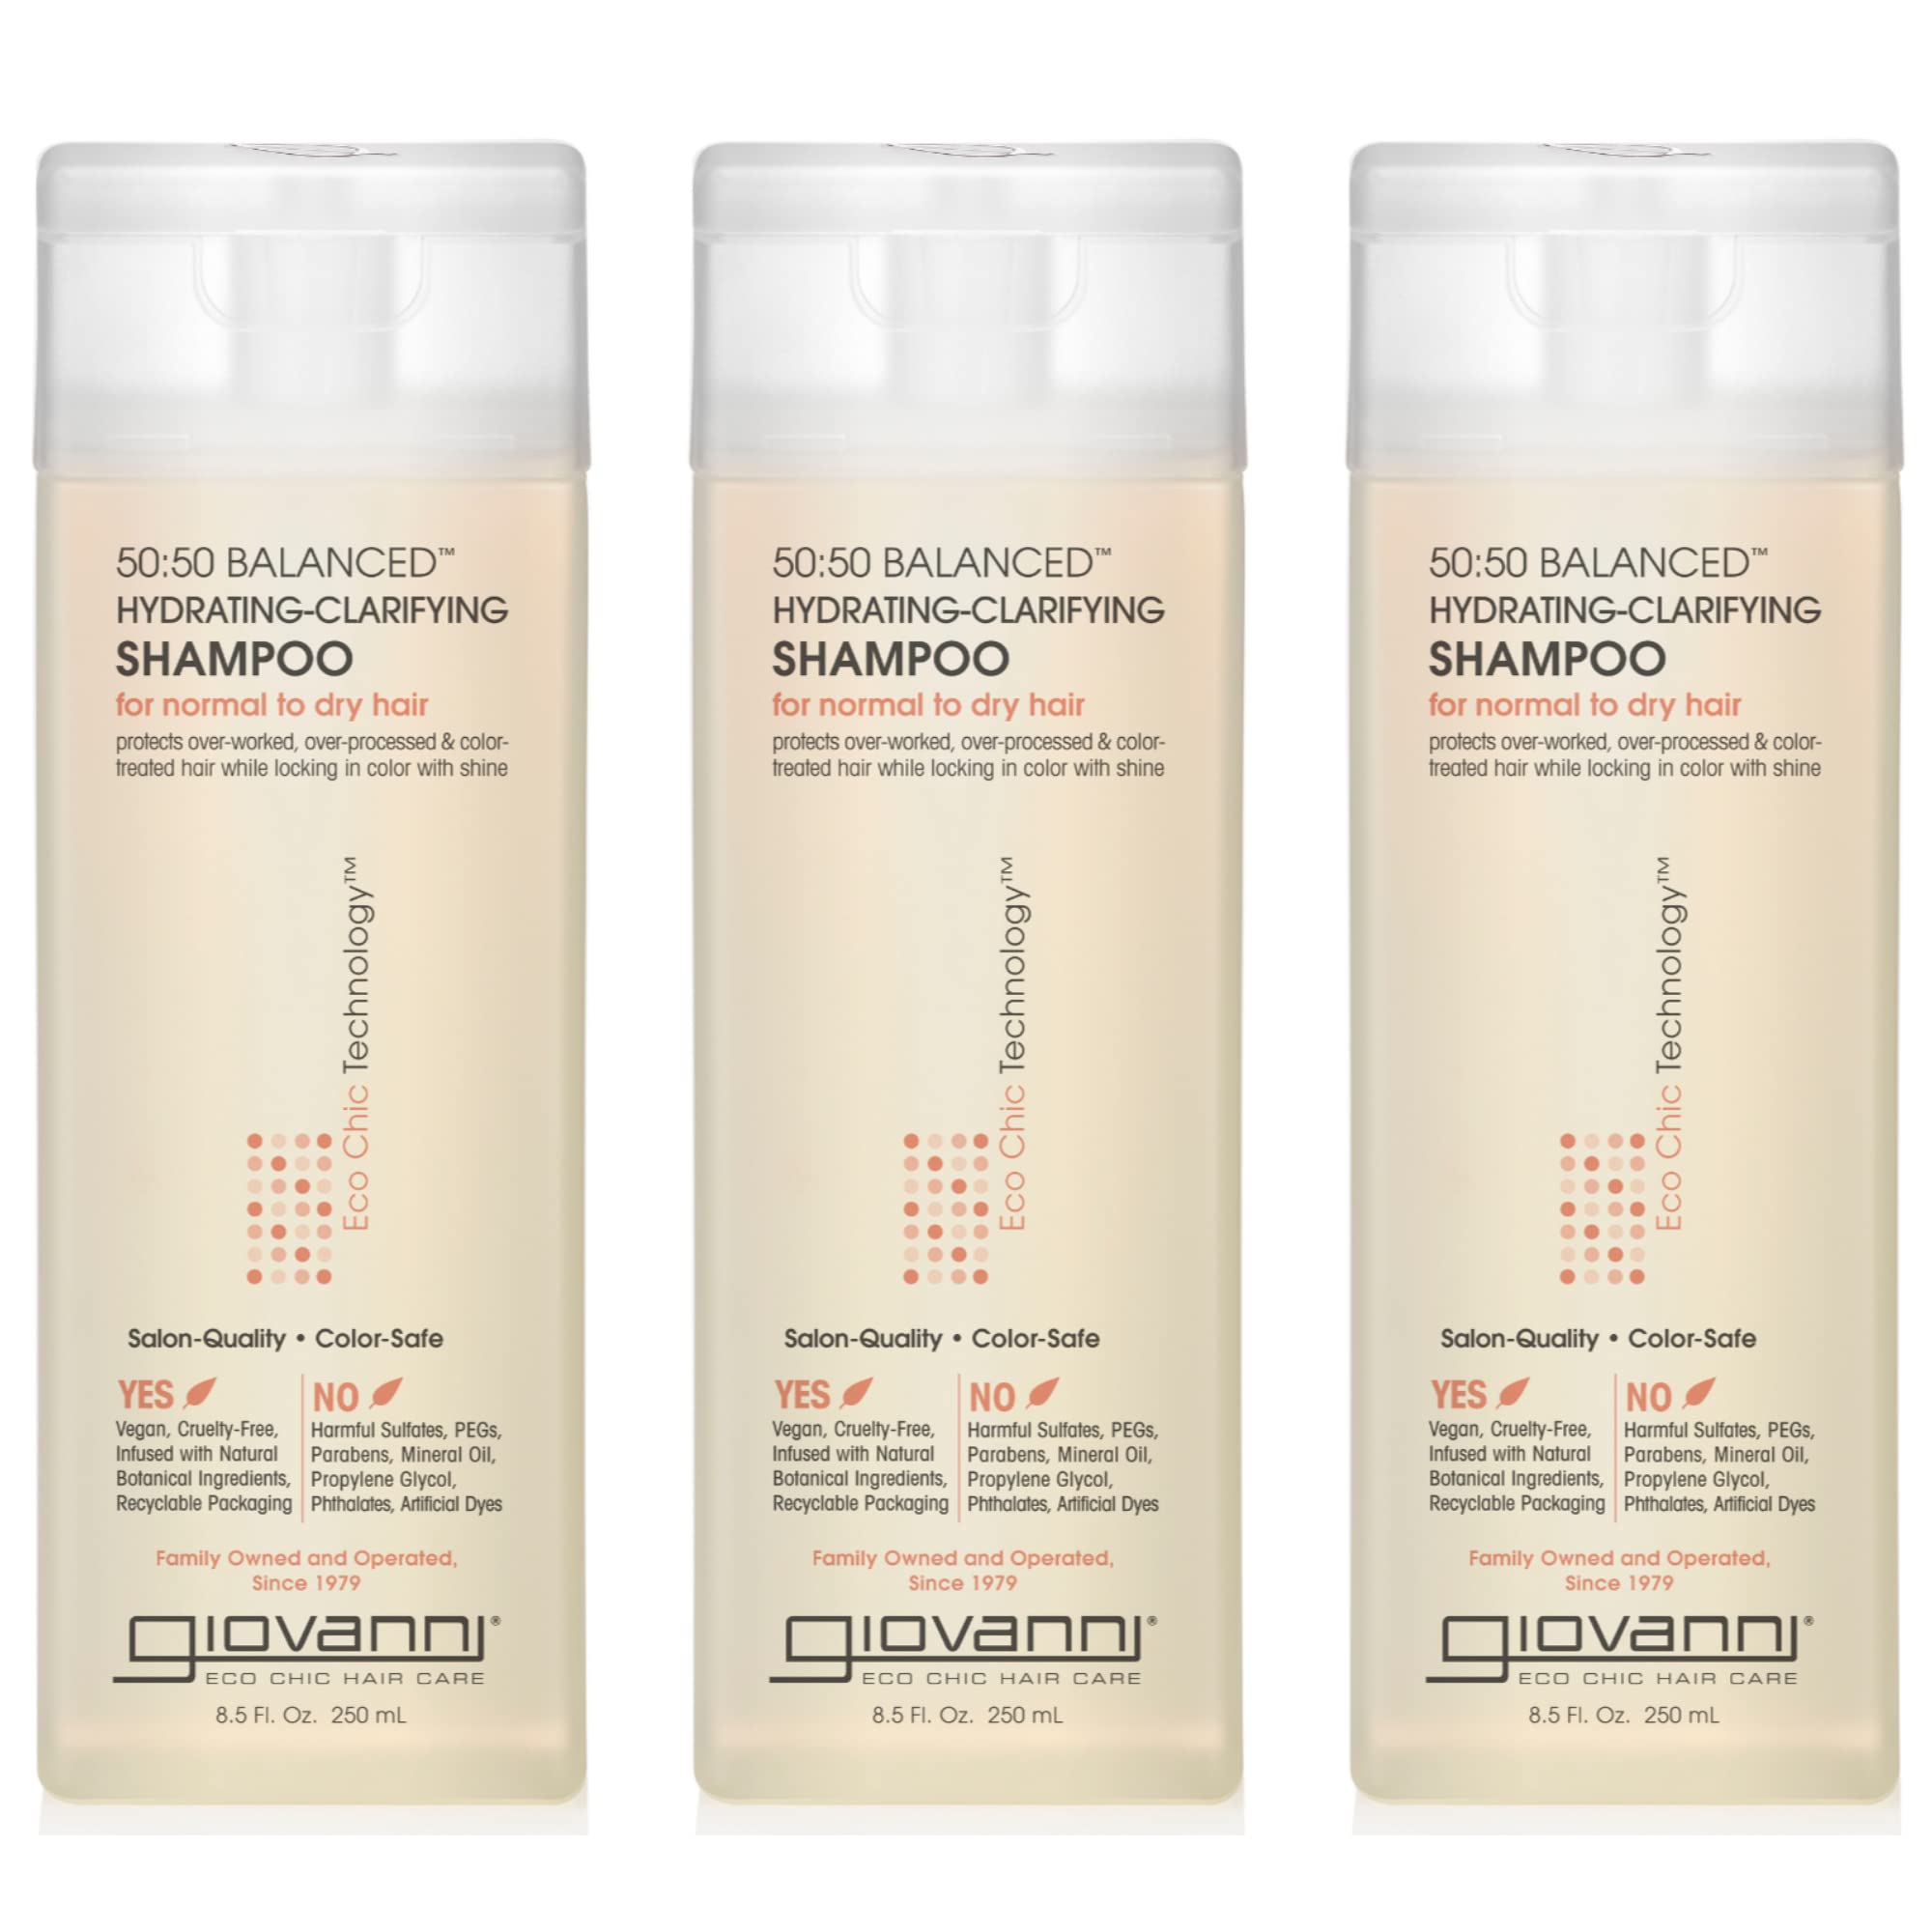 GIOVANNI ECO CHIC 50:50 Balanced Hydrating Clarifying Shampoo - Leaves Hair pH Balanced for Over-Processed Hair, Provides Moisture & Protection, Salon Quality, No Parabens, Color Safe - 8.5 oz (3 Pack)